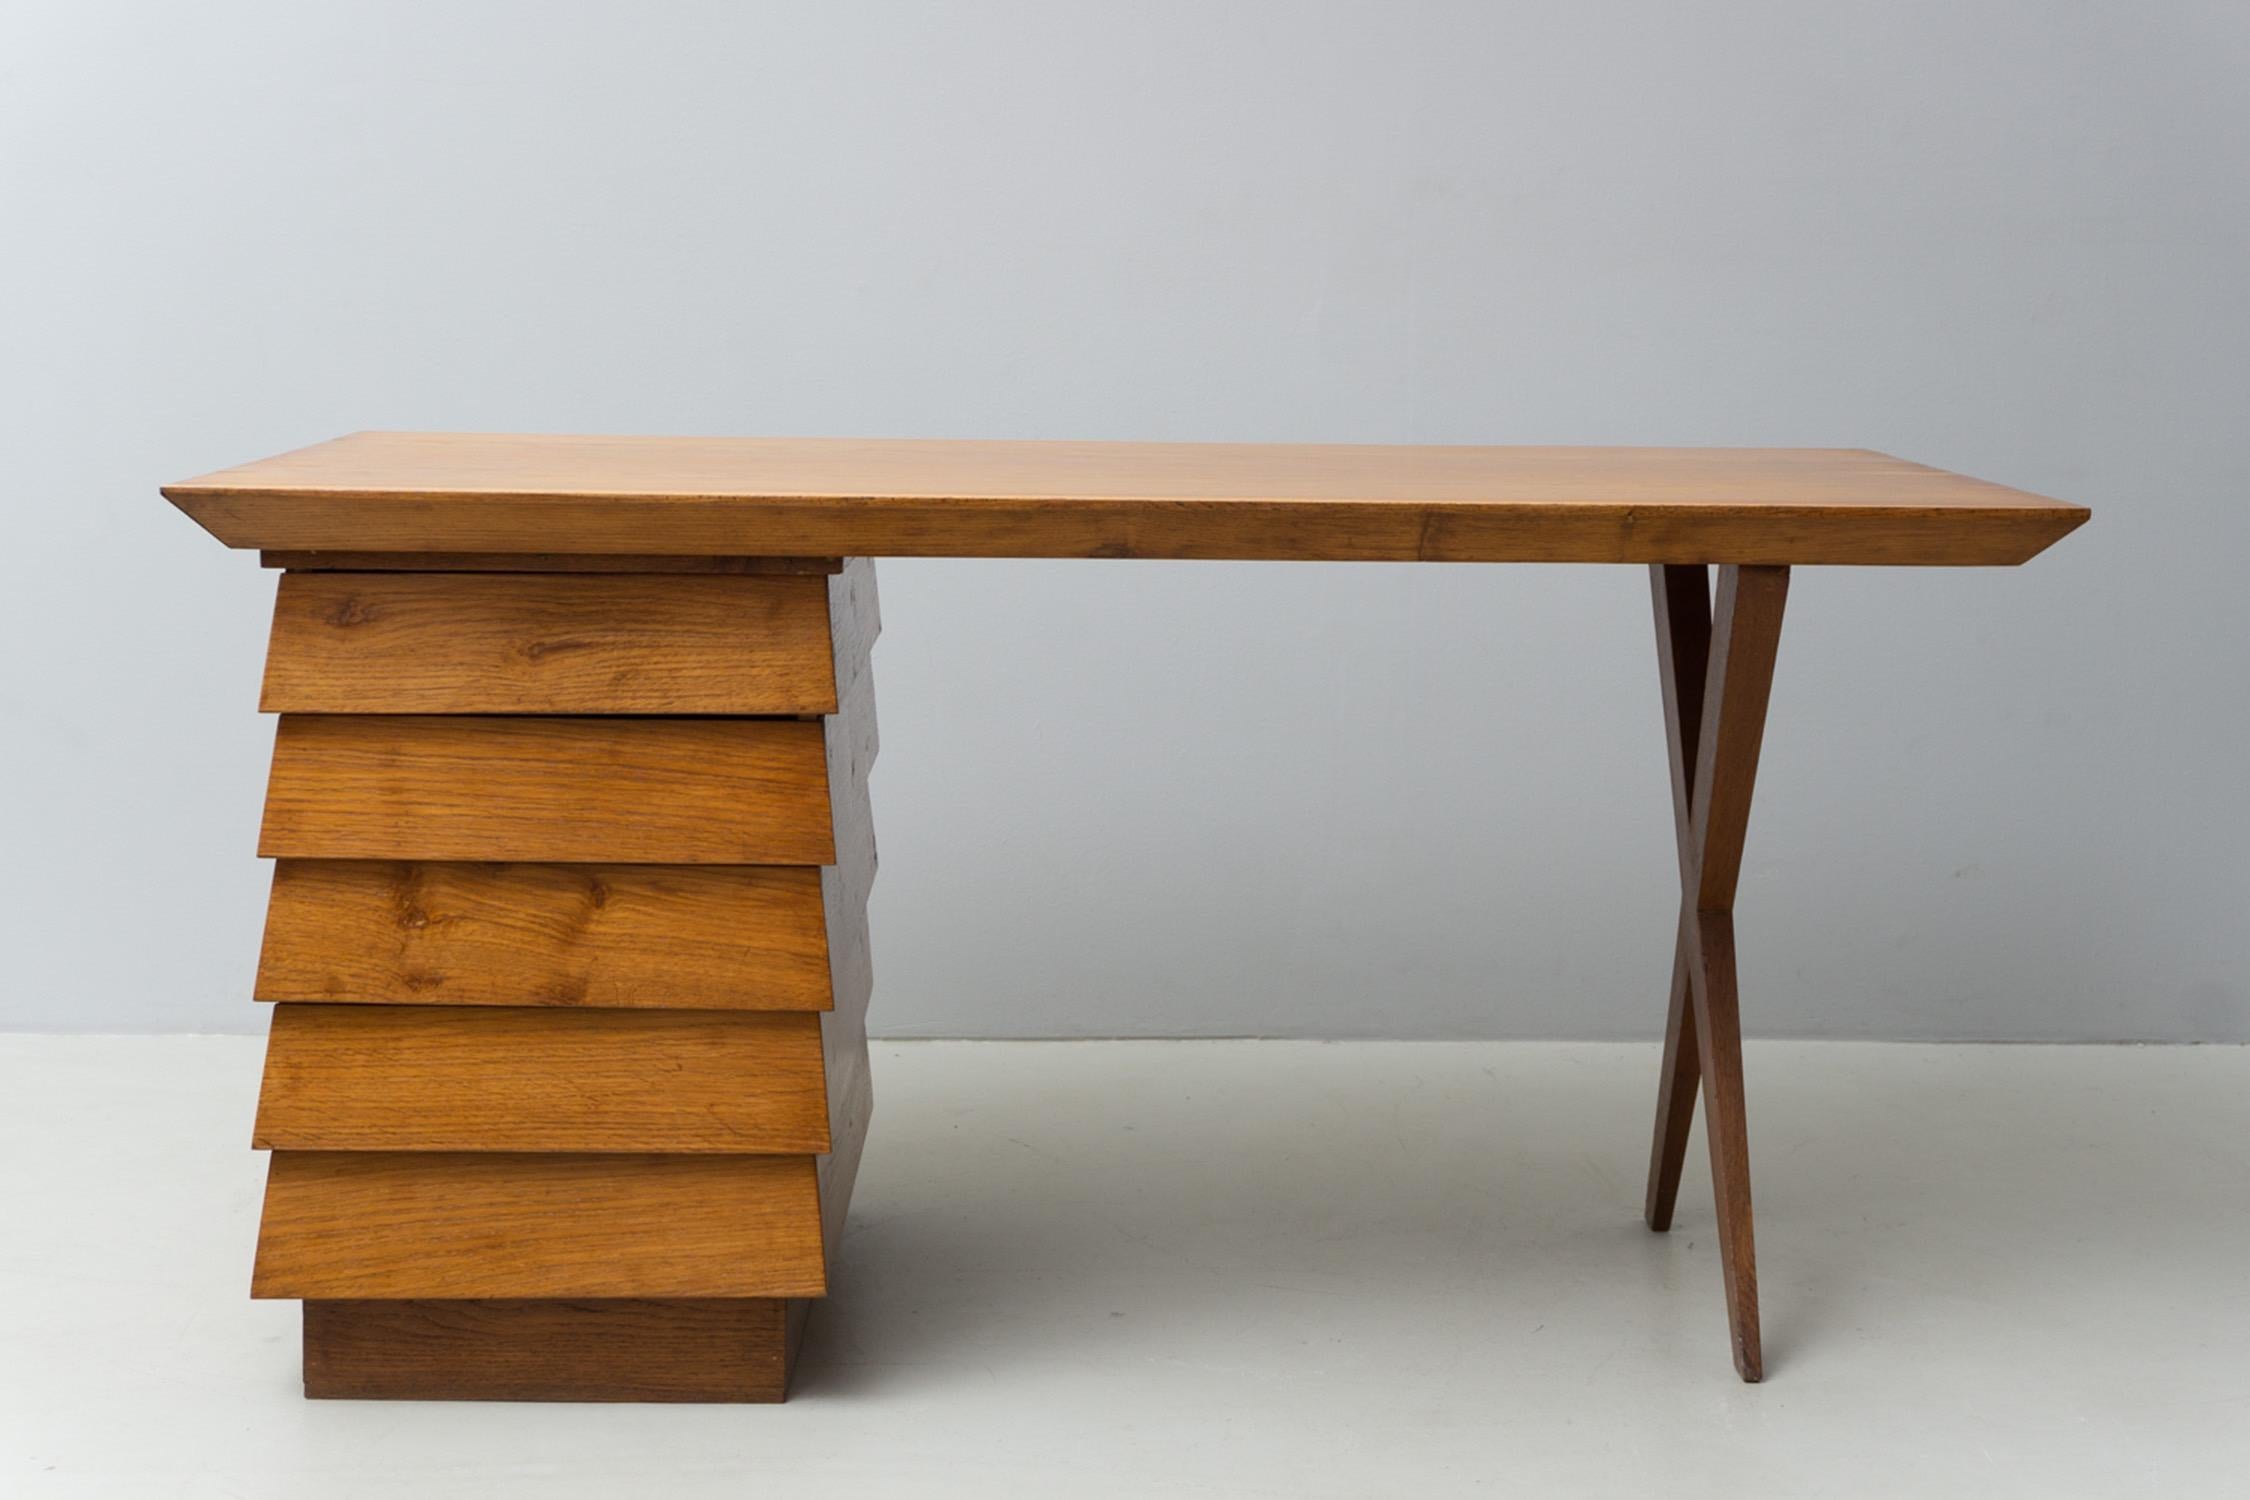 Extraordinary, sculptural walnut desk by Melchiorre Bega, originally designed in 1940.

Melchiorre Bega was born in Caselle di Crevalcore (BO) in 1898. He graduated in Architecture from the Academy of Fine Arts in Bologna. From 1941 to 1944 he